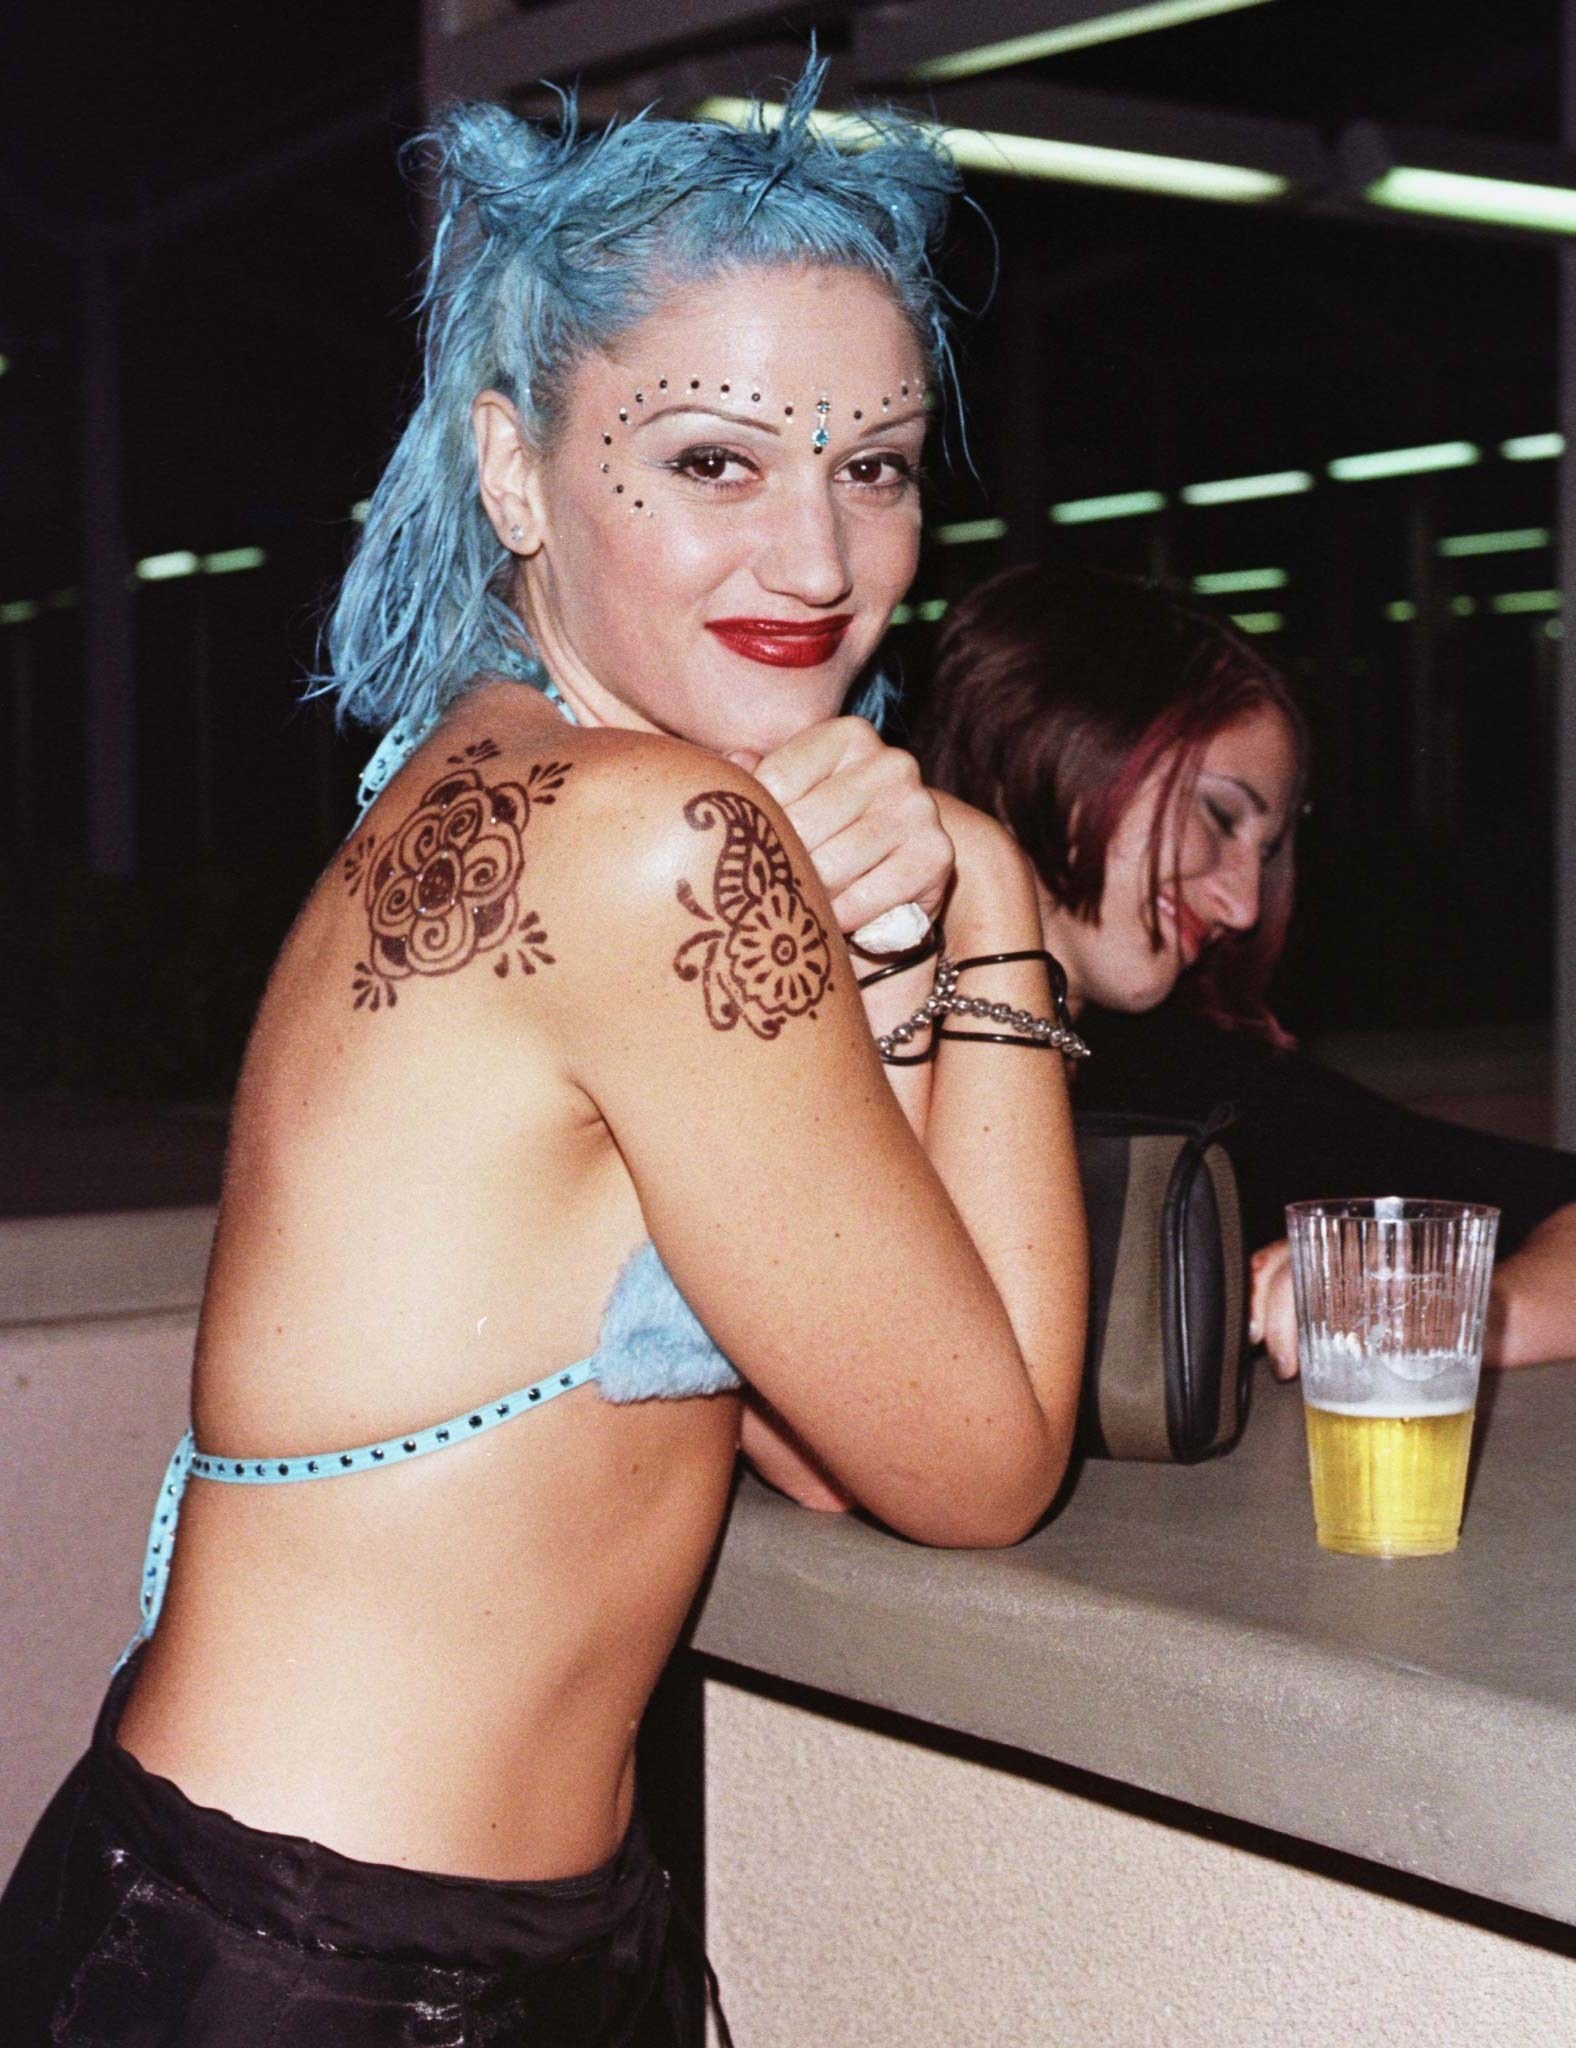 Singer Gwen Stefani of the group No Doubt poses at the party following the MTV Video Music Awards